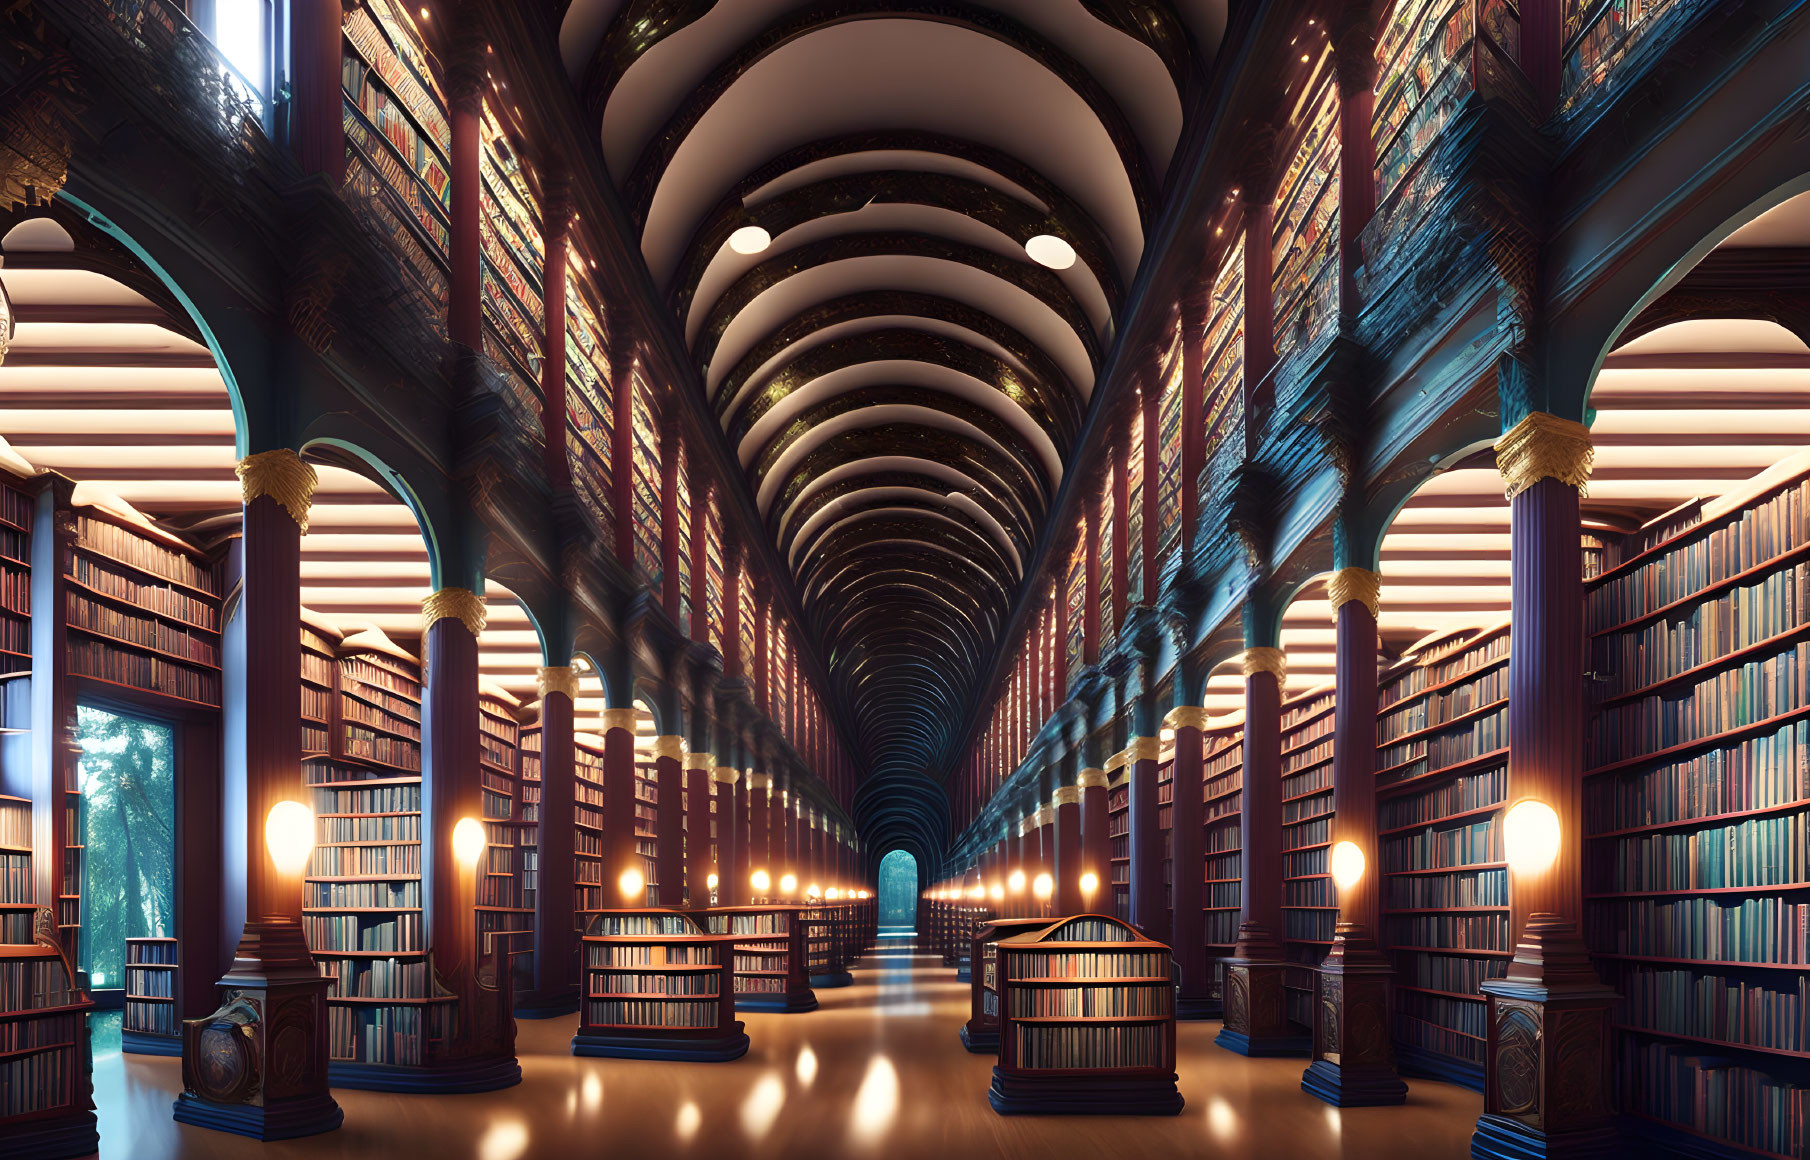 Symmetrical grand library with towering bookshelves and warm lighting